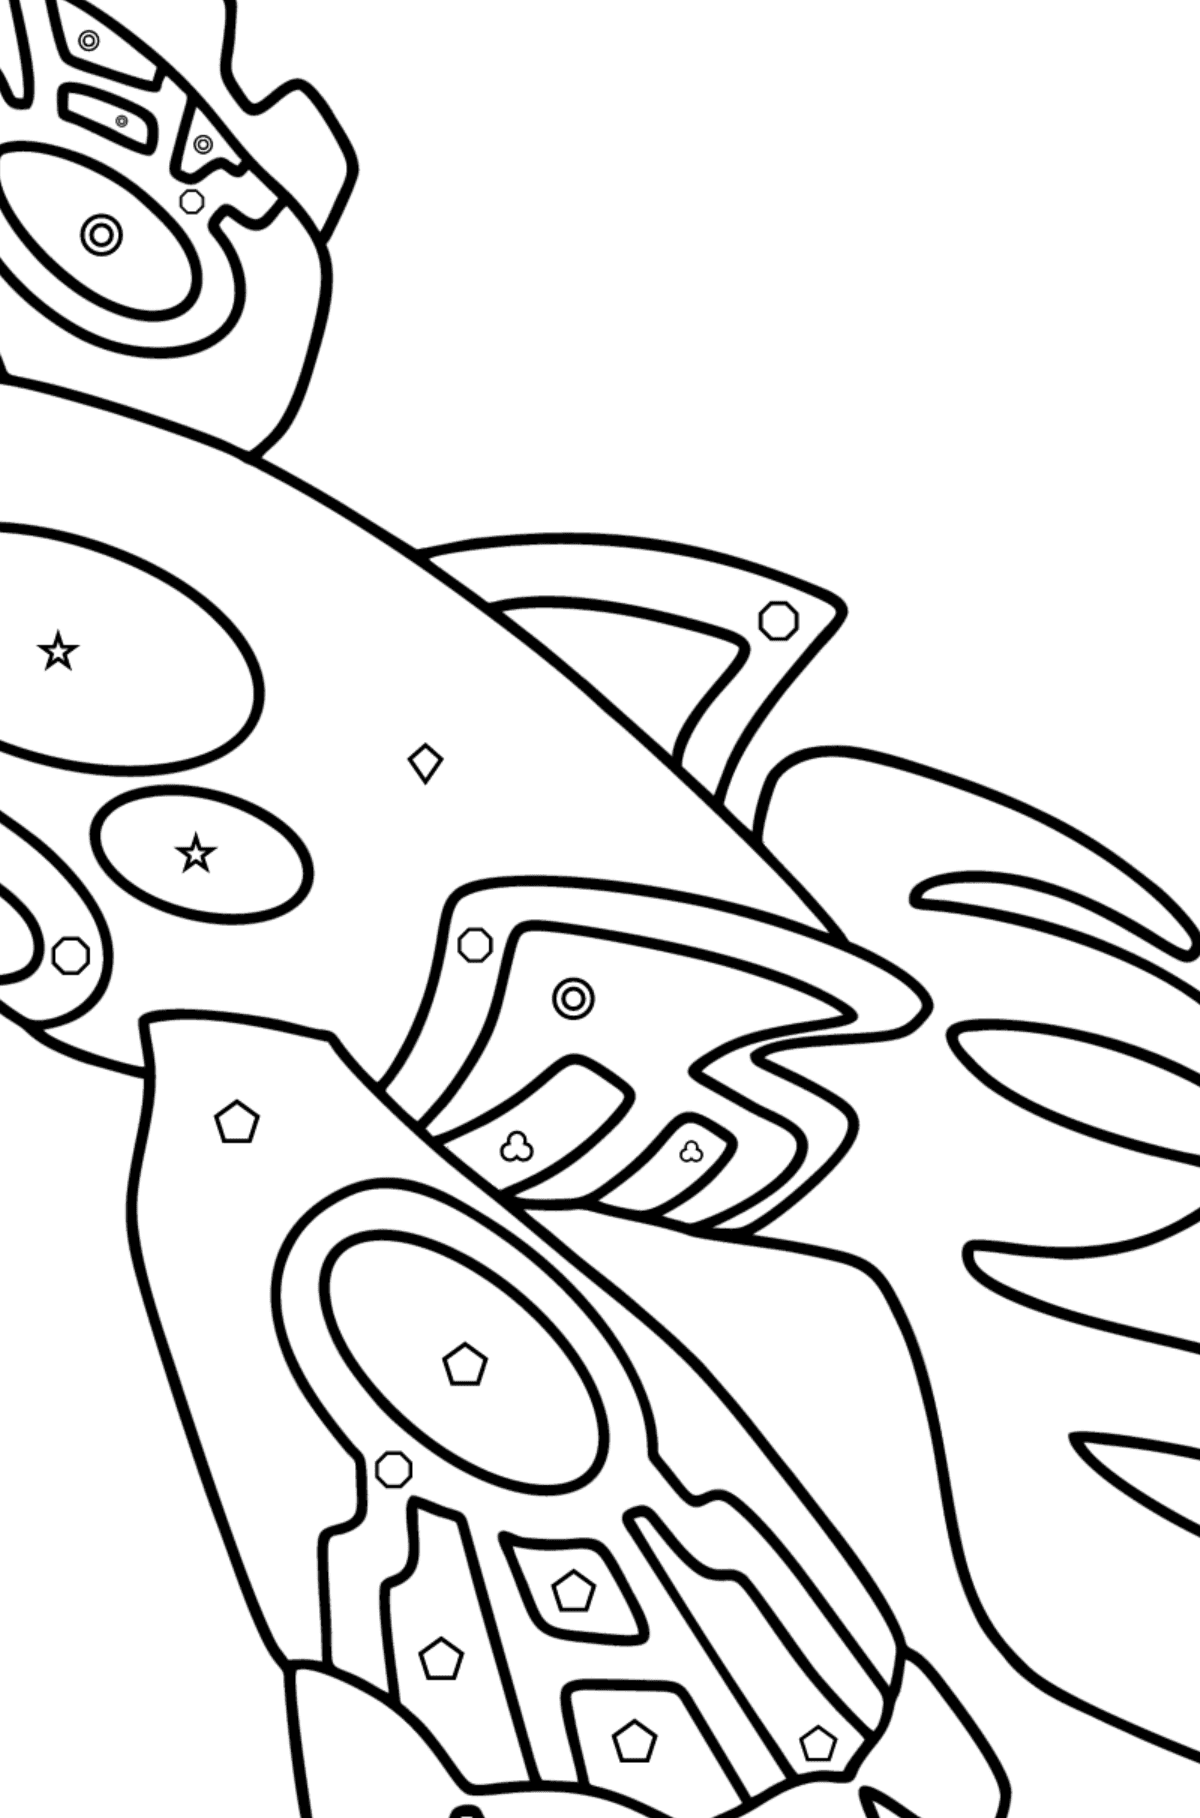 Coloring page Pokemon Go Kyogre - Coloring by Geometric Shapes for Kids